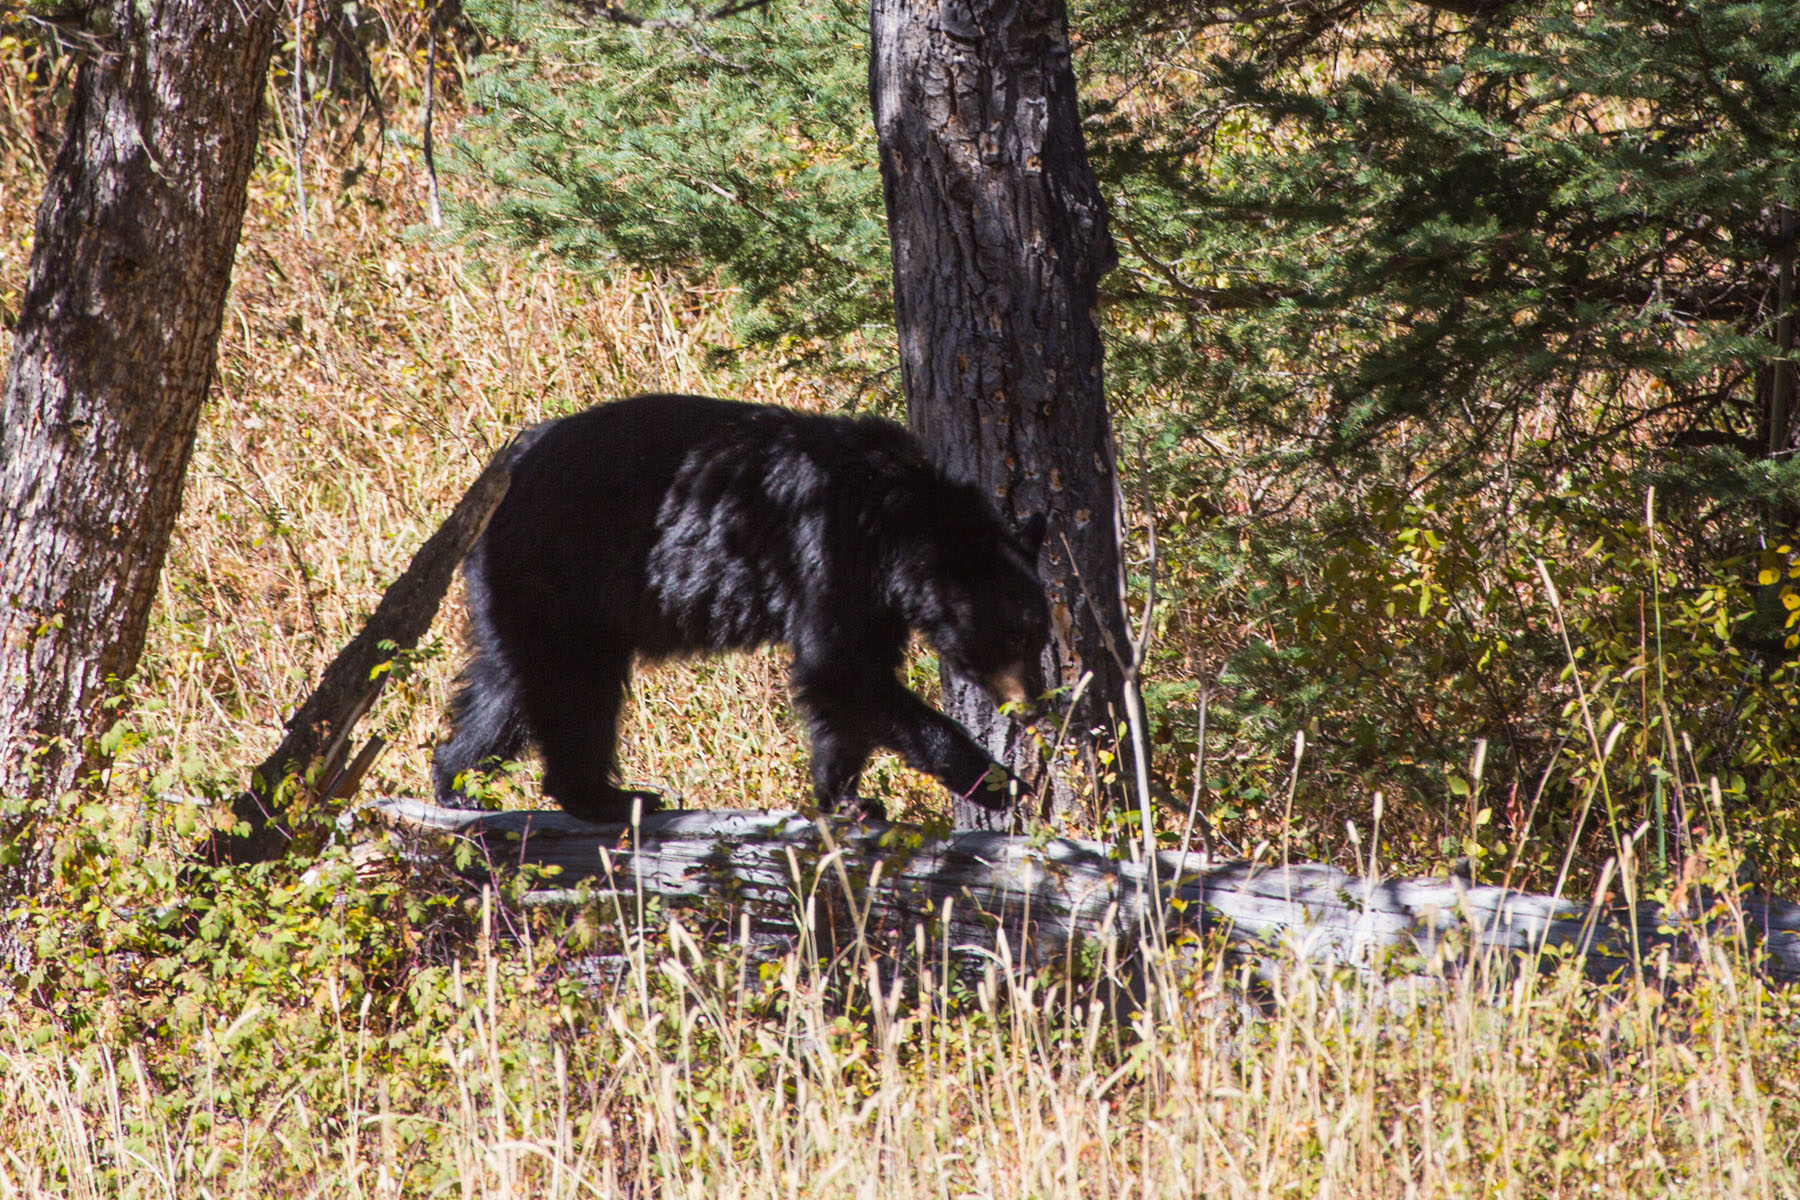 Black bear in Lamar Valley, Yellowstone National Park.  Click for next photo.